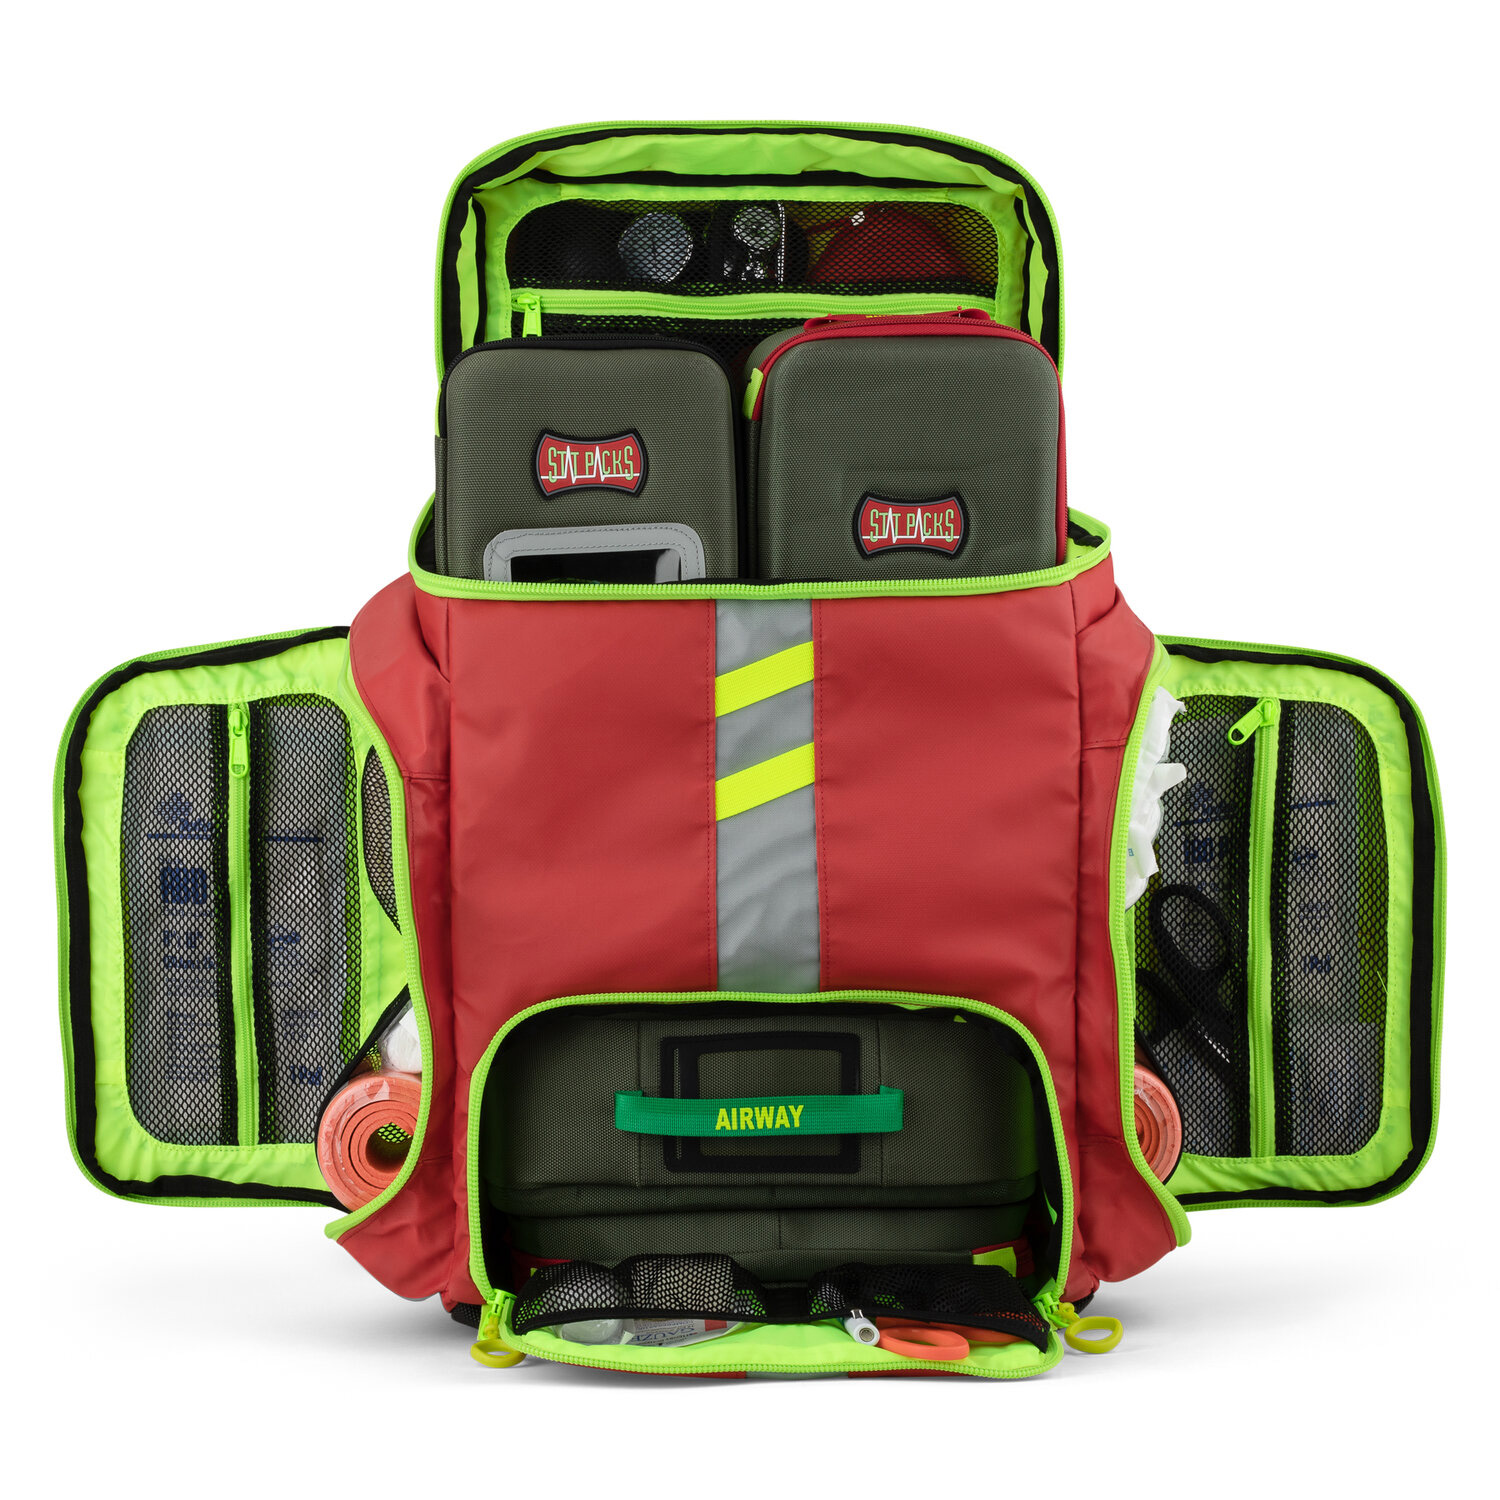 Statpack G3 Clinician primary responder medical pack